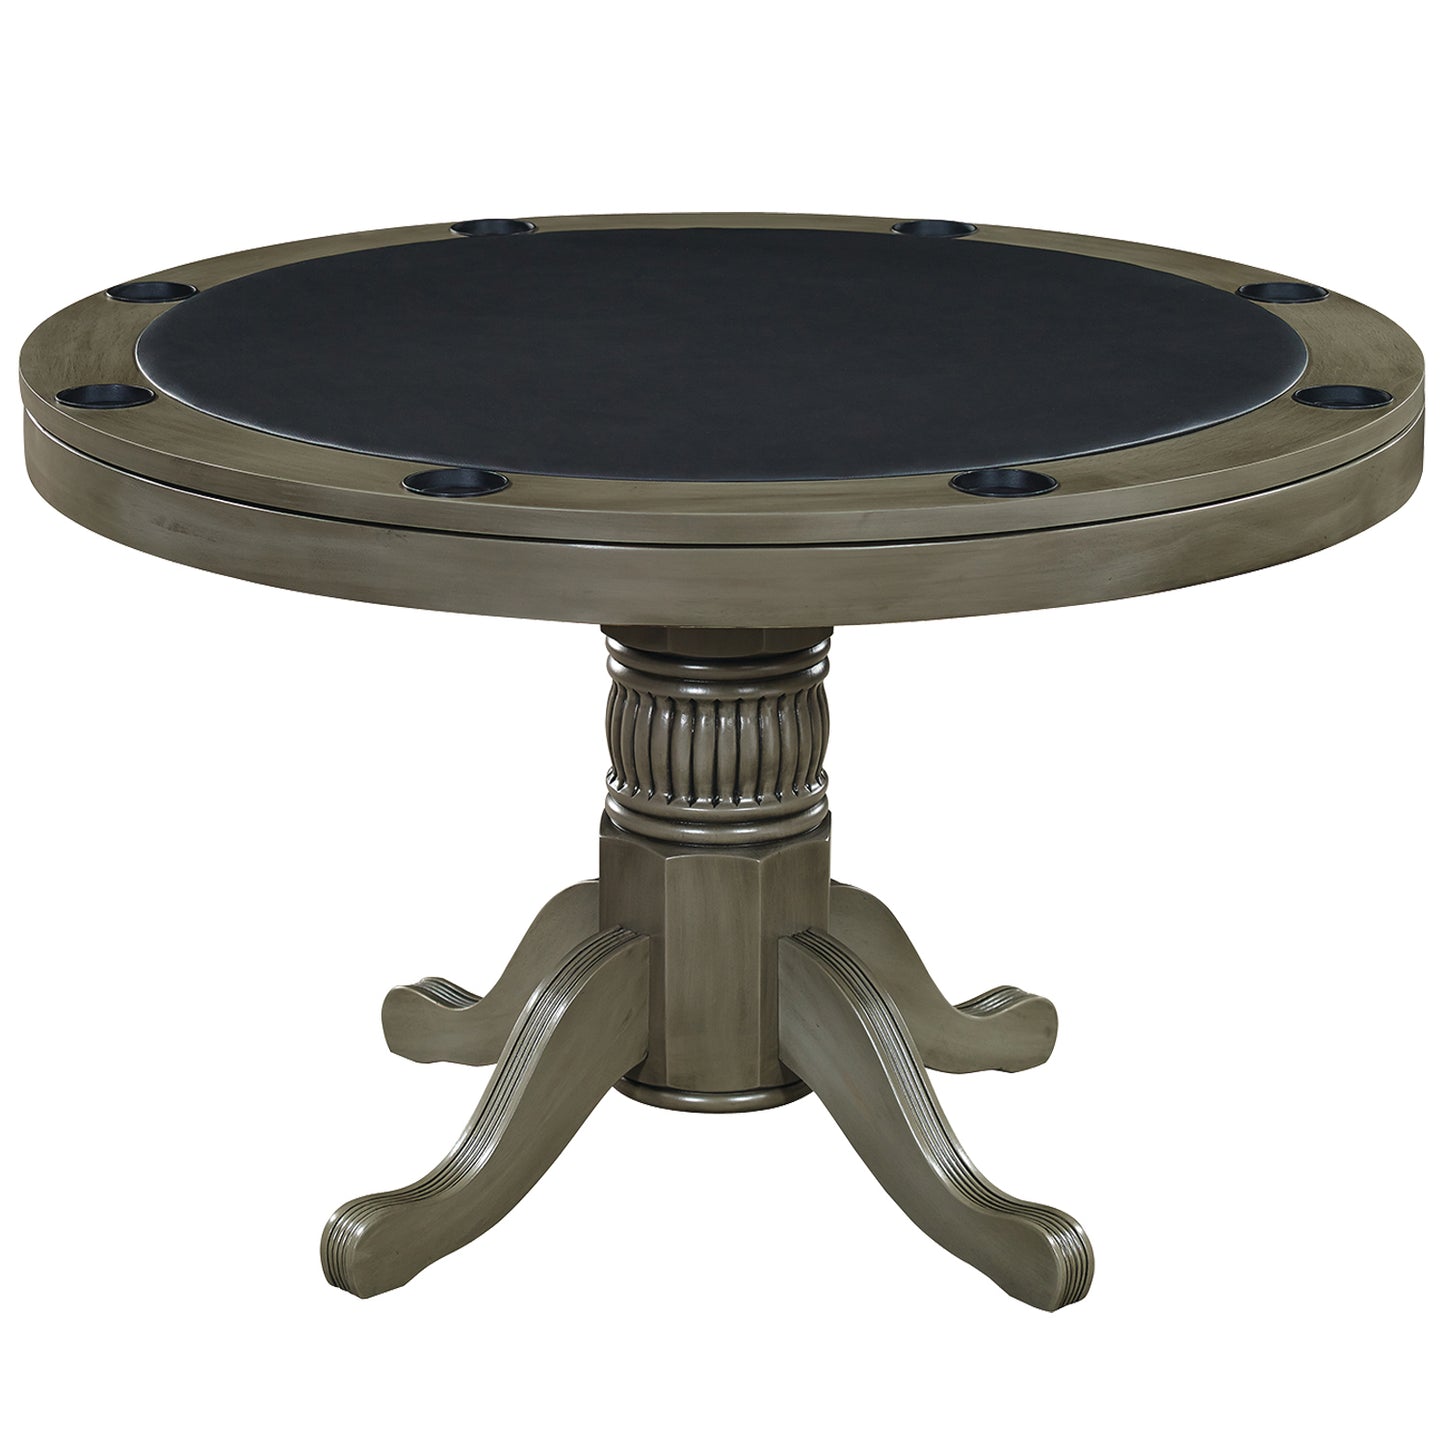 Round convertible game table with a black padded vinyl game top in a slate finish.